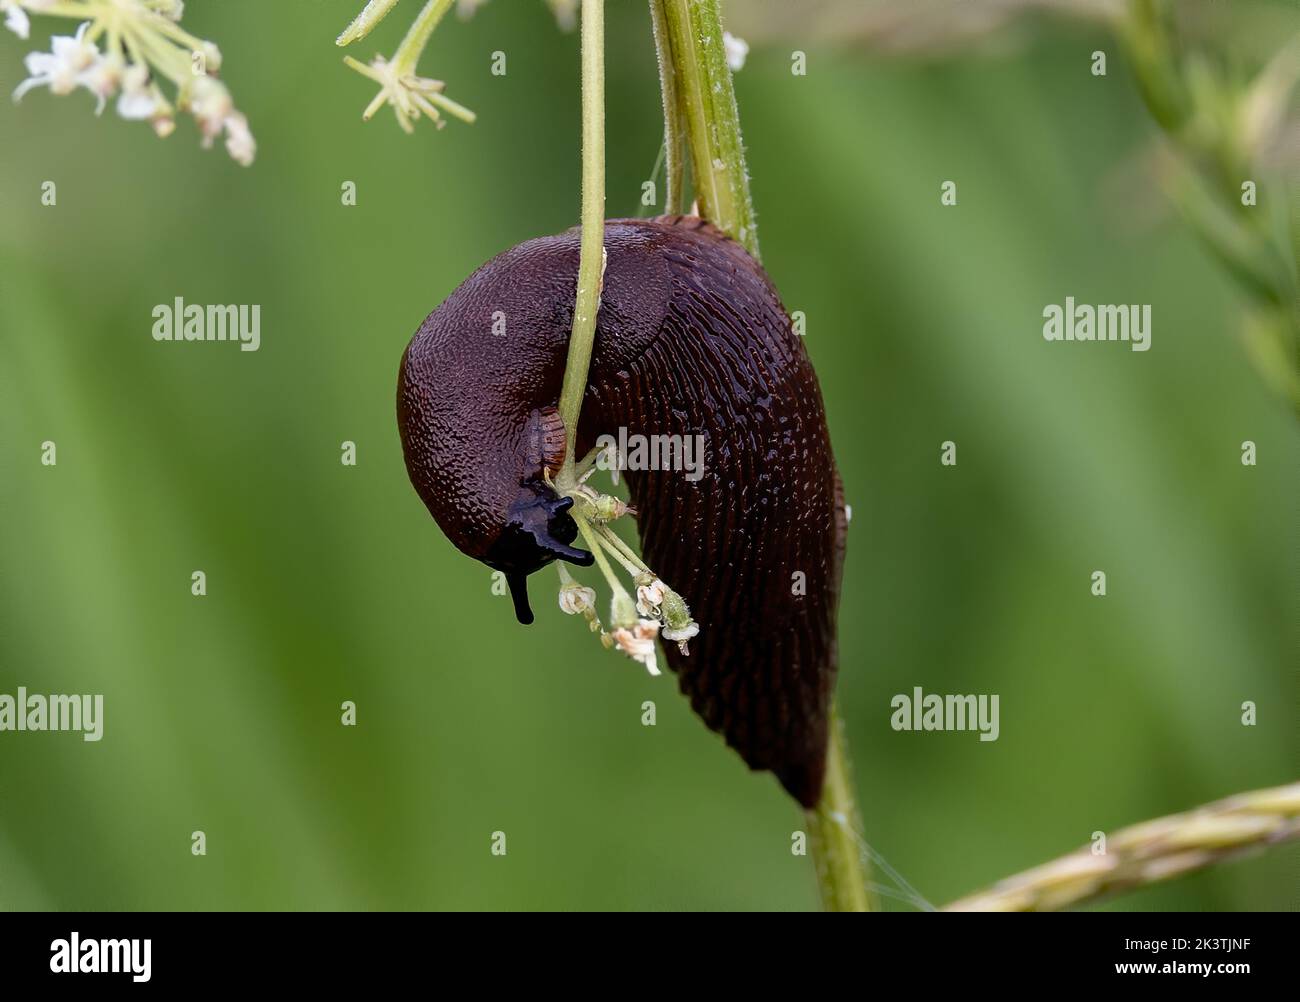 A closeup shot of a snail without shell on a plant with blurred background Stock Photo